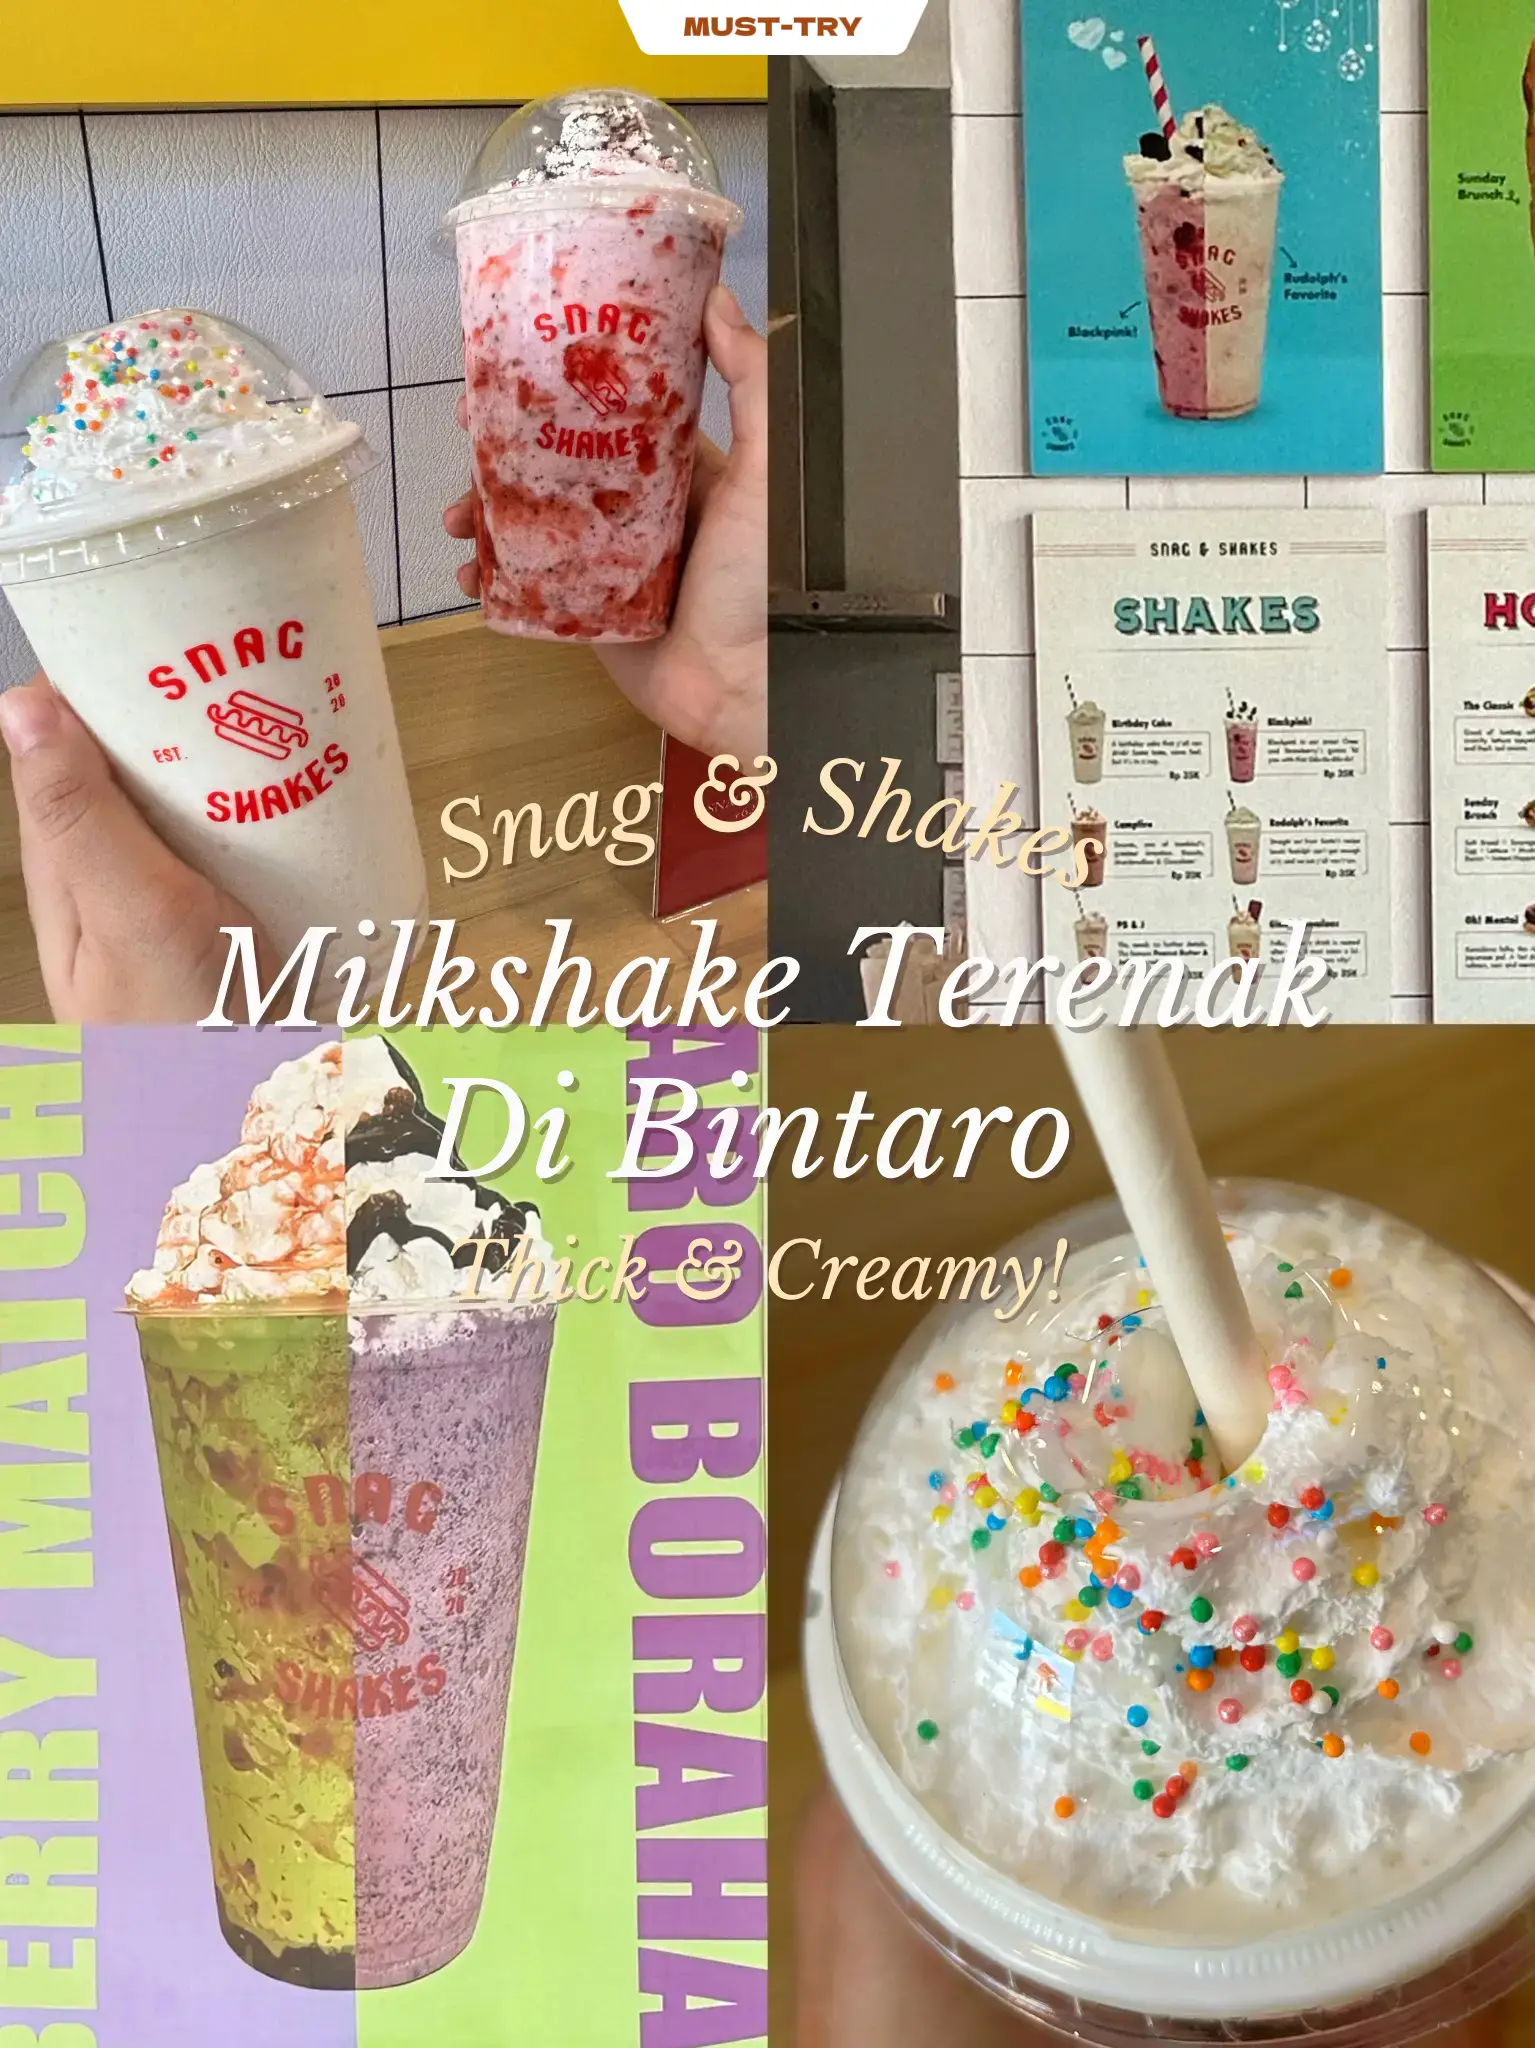 Snack Mania Brazilian Delights - Weekend is here, it's Milkshake time 😎🥤  Our Cookies 'N Cream shake has been the champ in sales these past few weeks  and we just want to